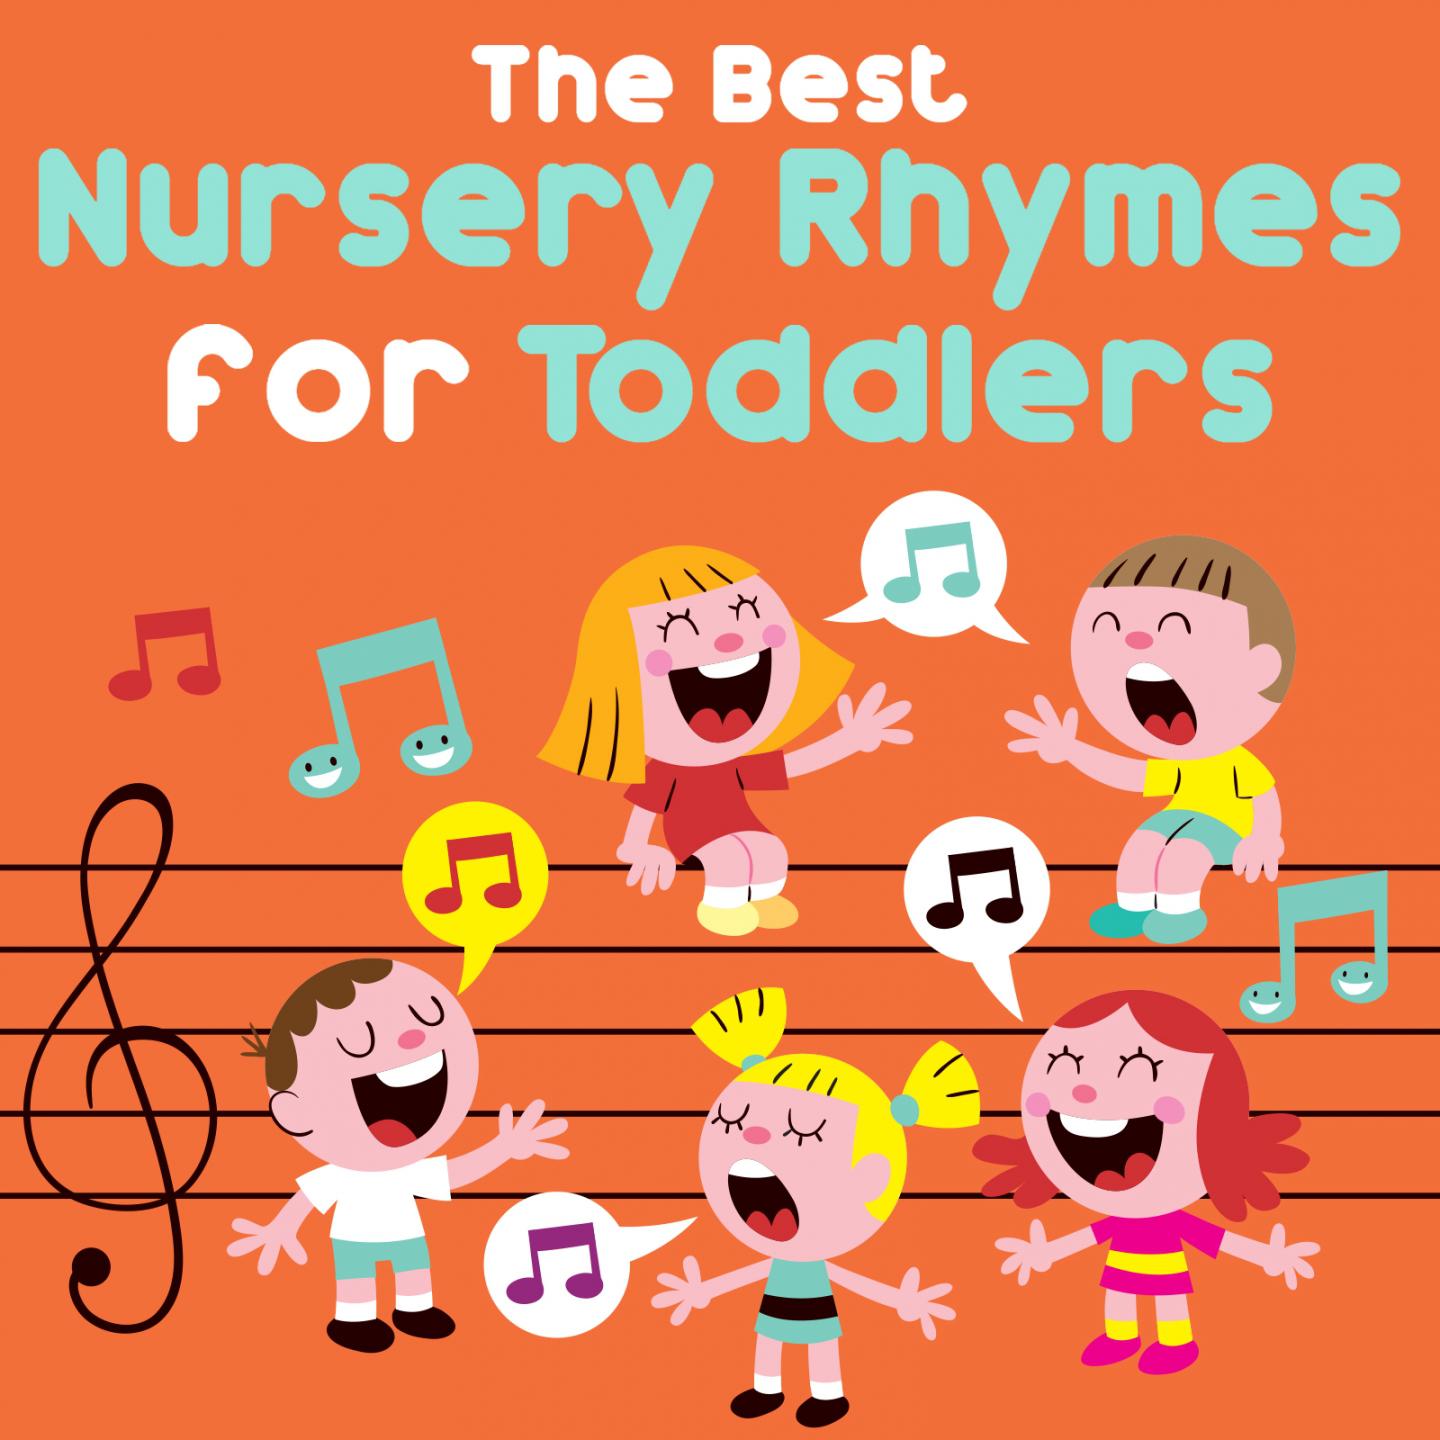 The Best Nursery Rhymes for Toddlers